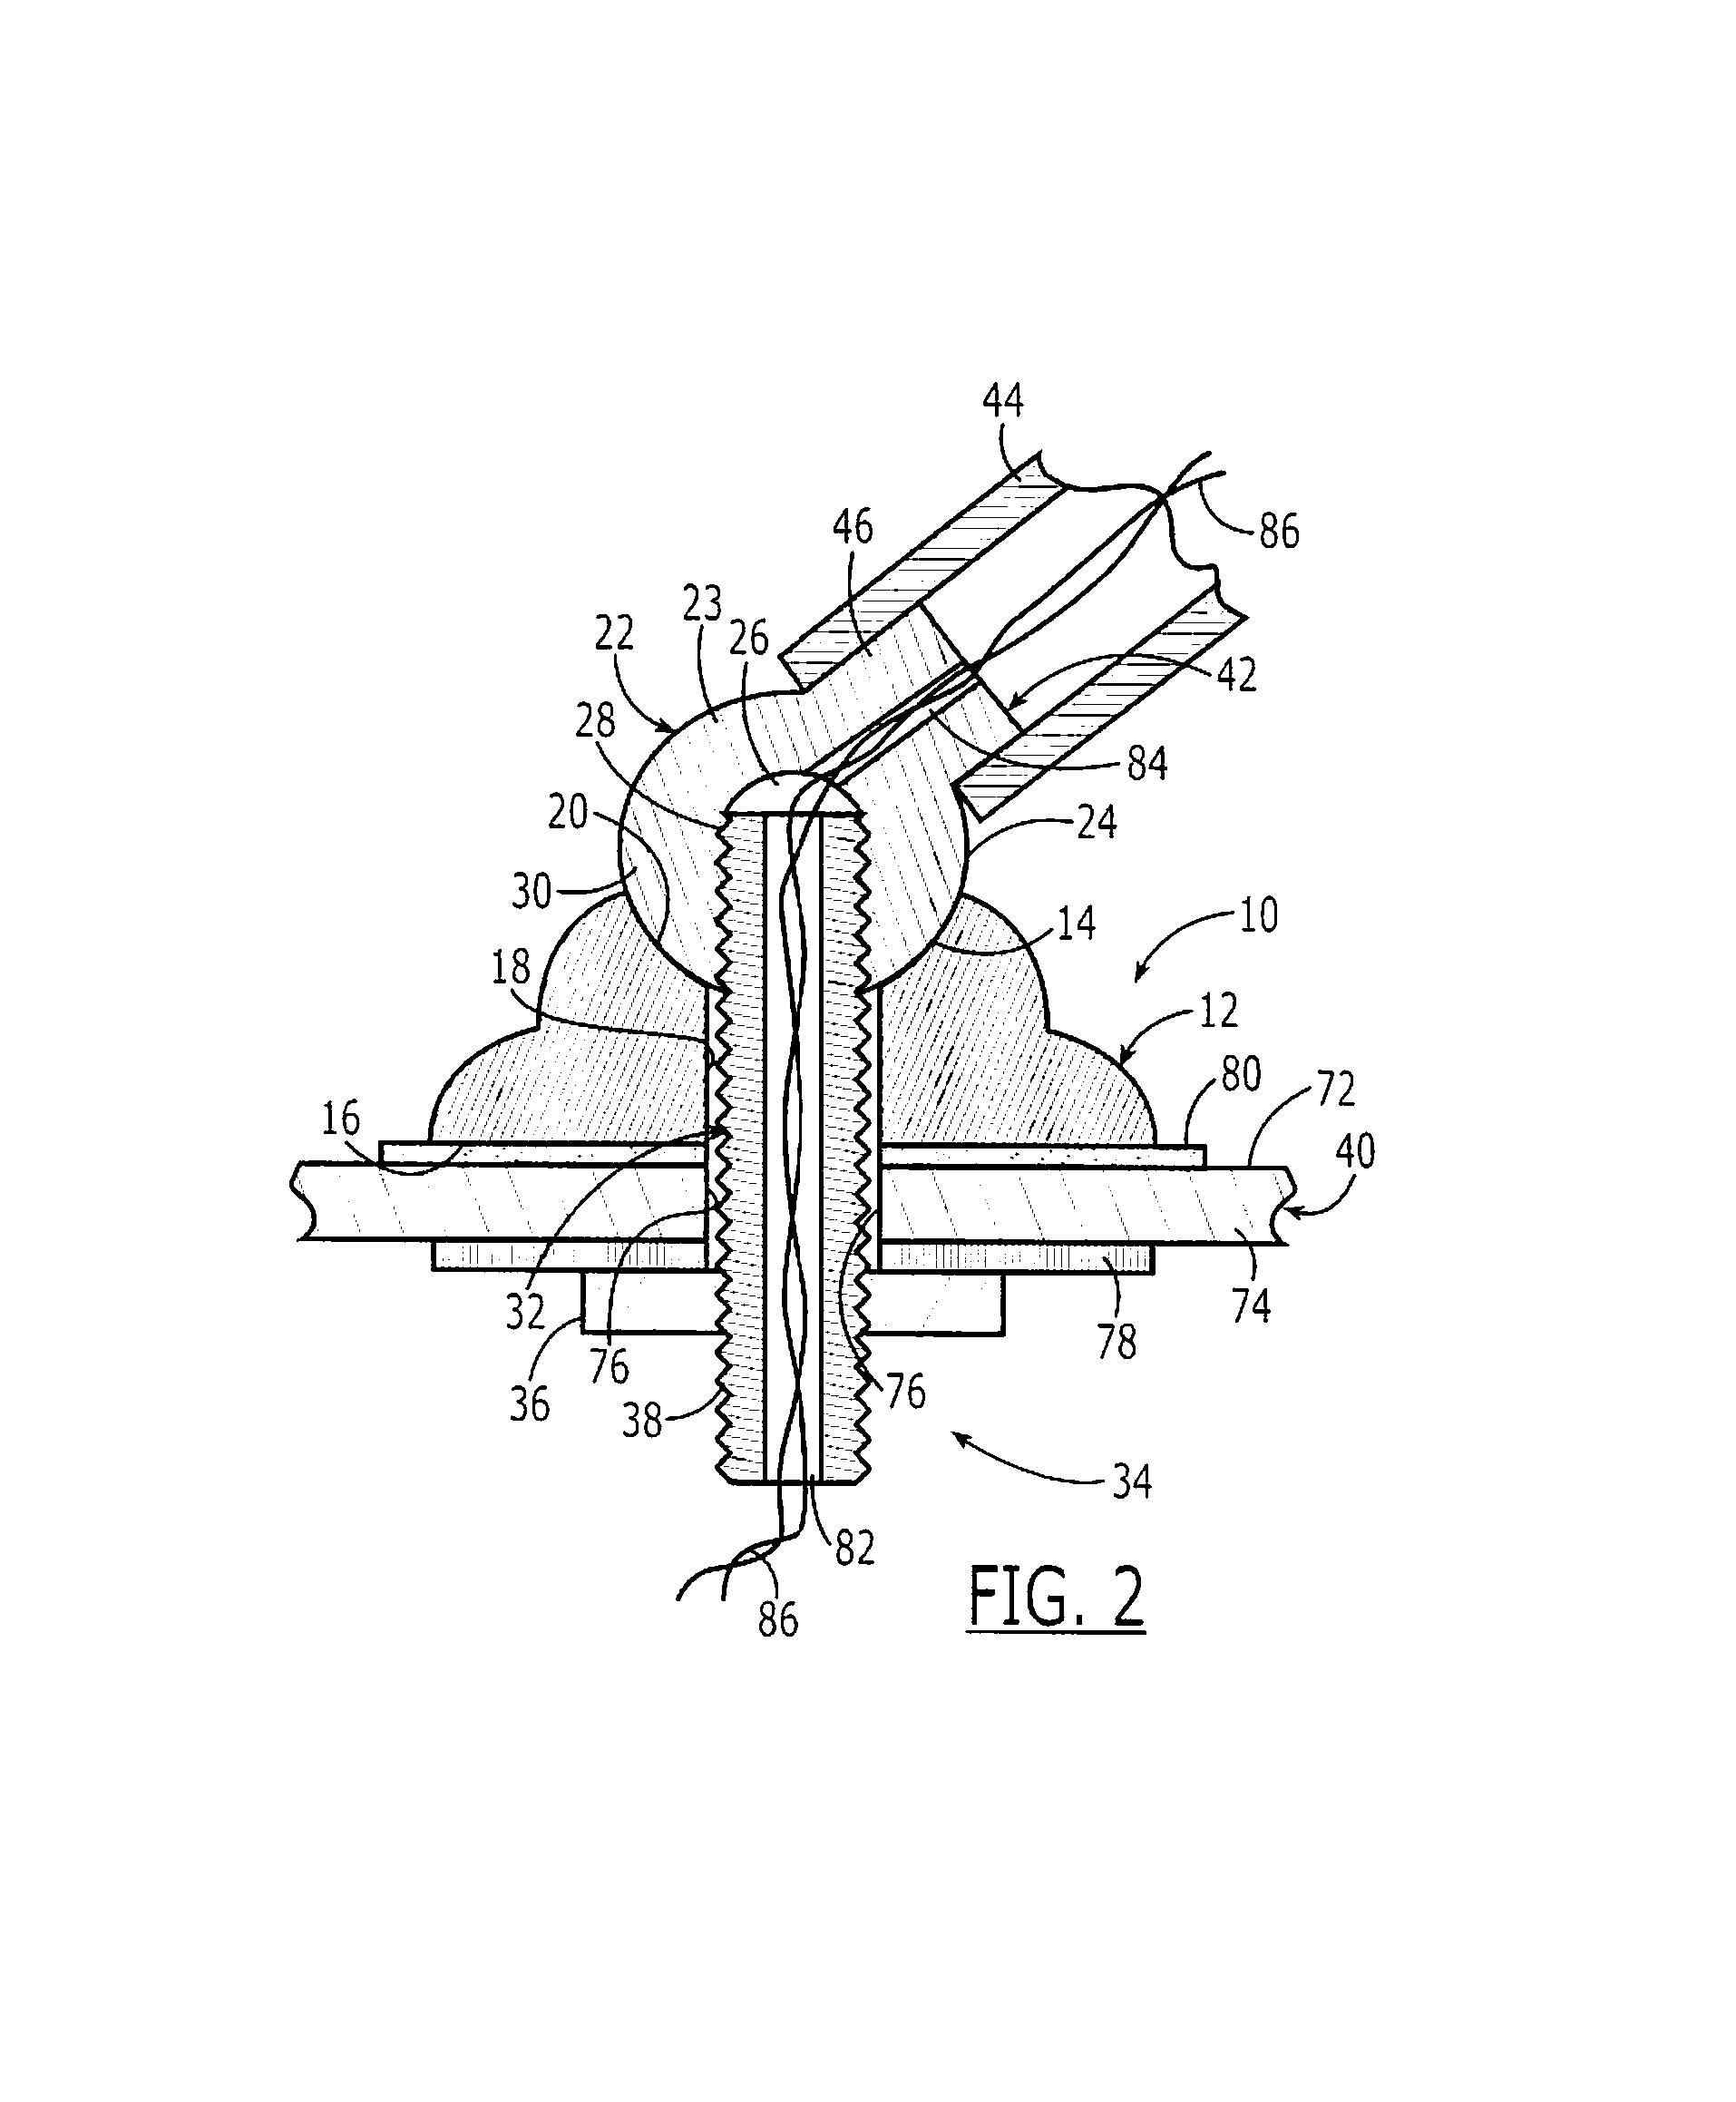 Mounting system and method for rigidly attaching a water sports towing frame to a vessel